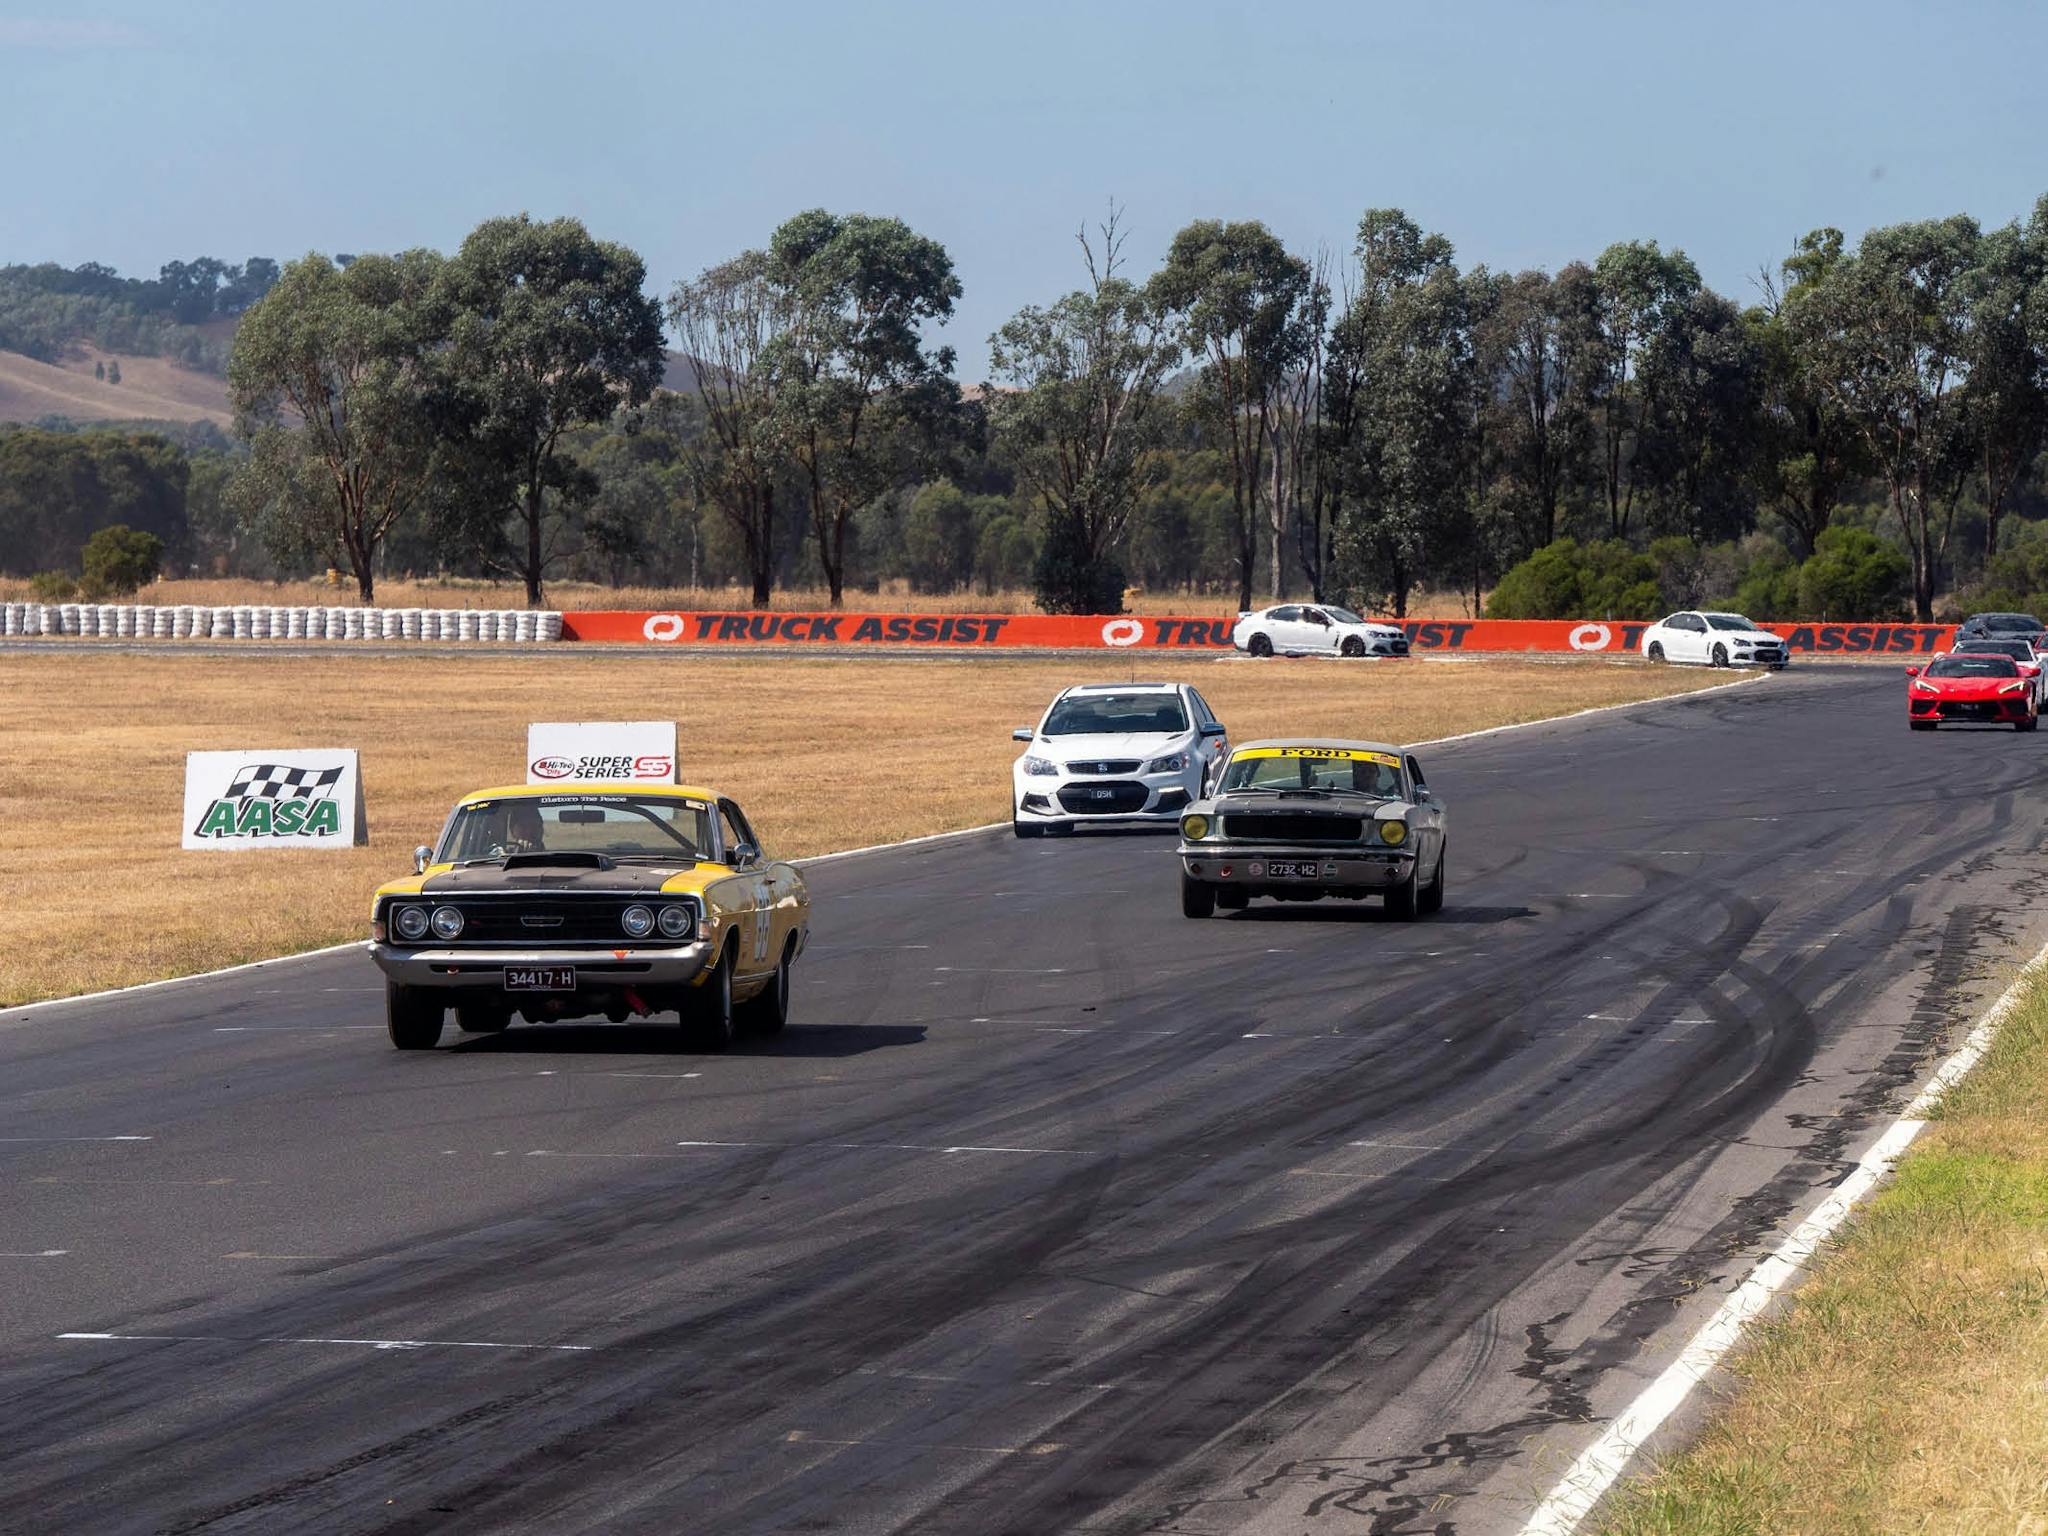 Mix of classic and modern cars on the racetrack